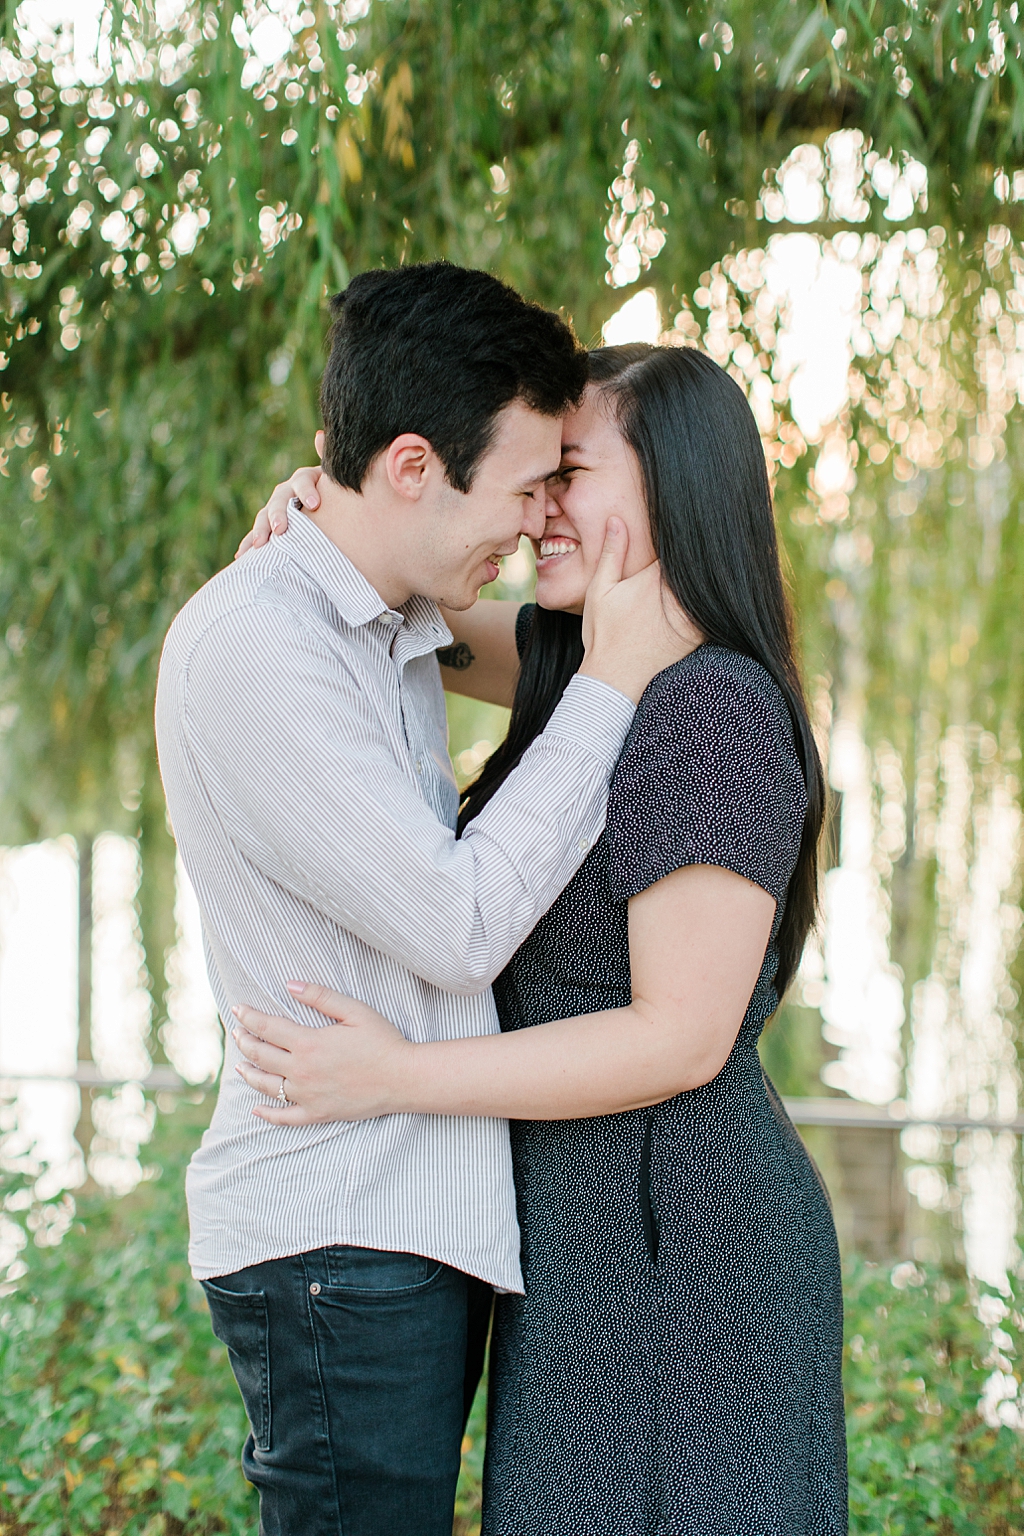 Becky_Collin_Navy_Yards_Park_The_Wharf_Washington_DC_Fall_Engagement_Session_AngelikaJohnsPhotography-7849.jpg